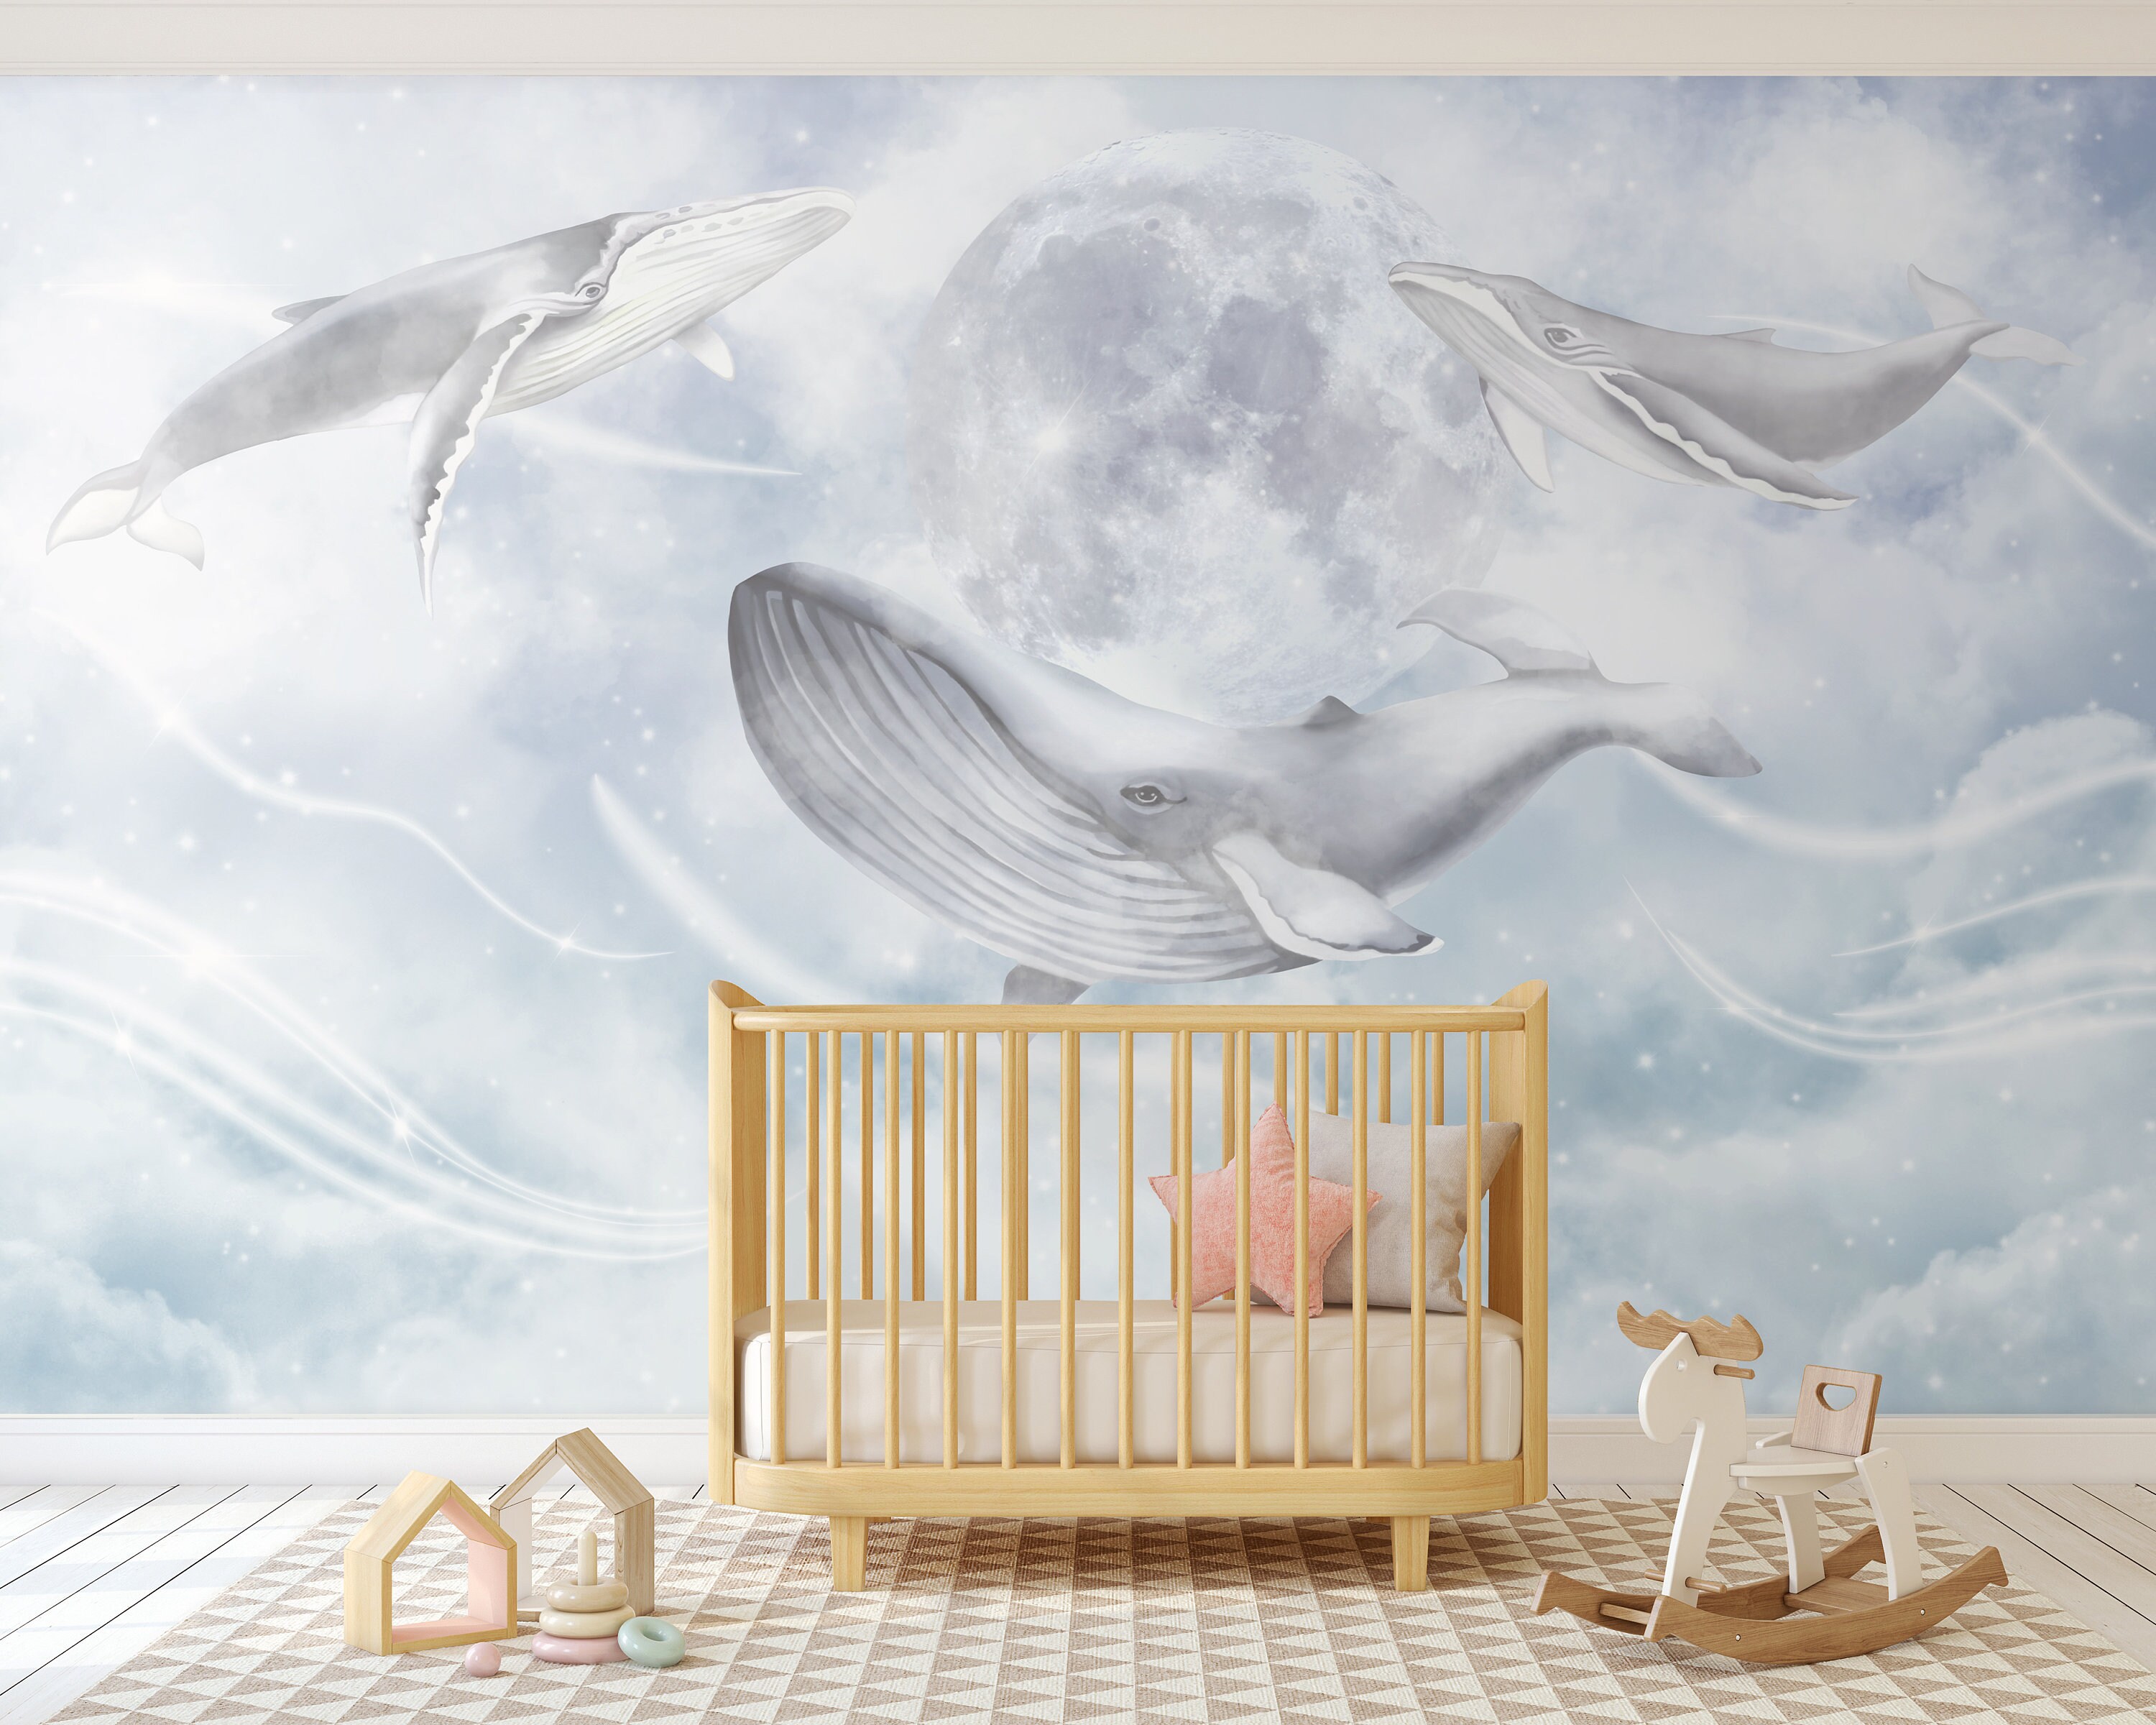 Girl's Nursery Room Design with Self-Adhesive Wallpaper – CostaCover